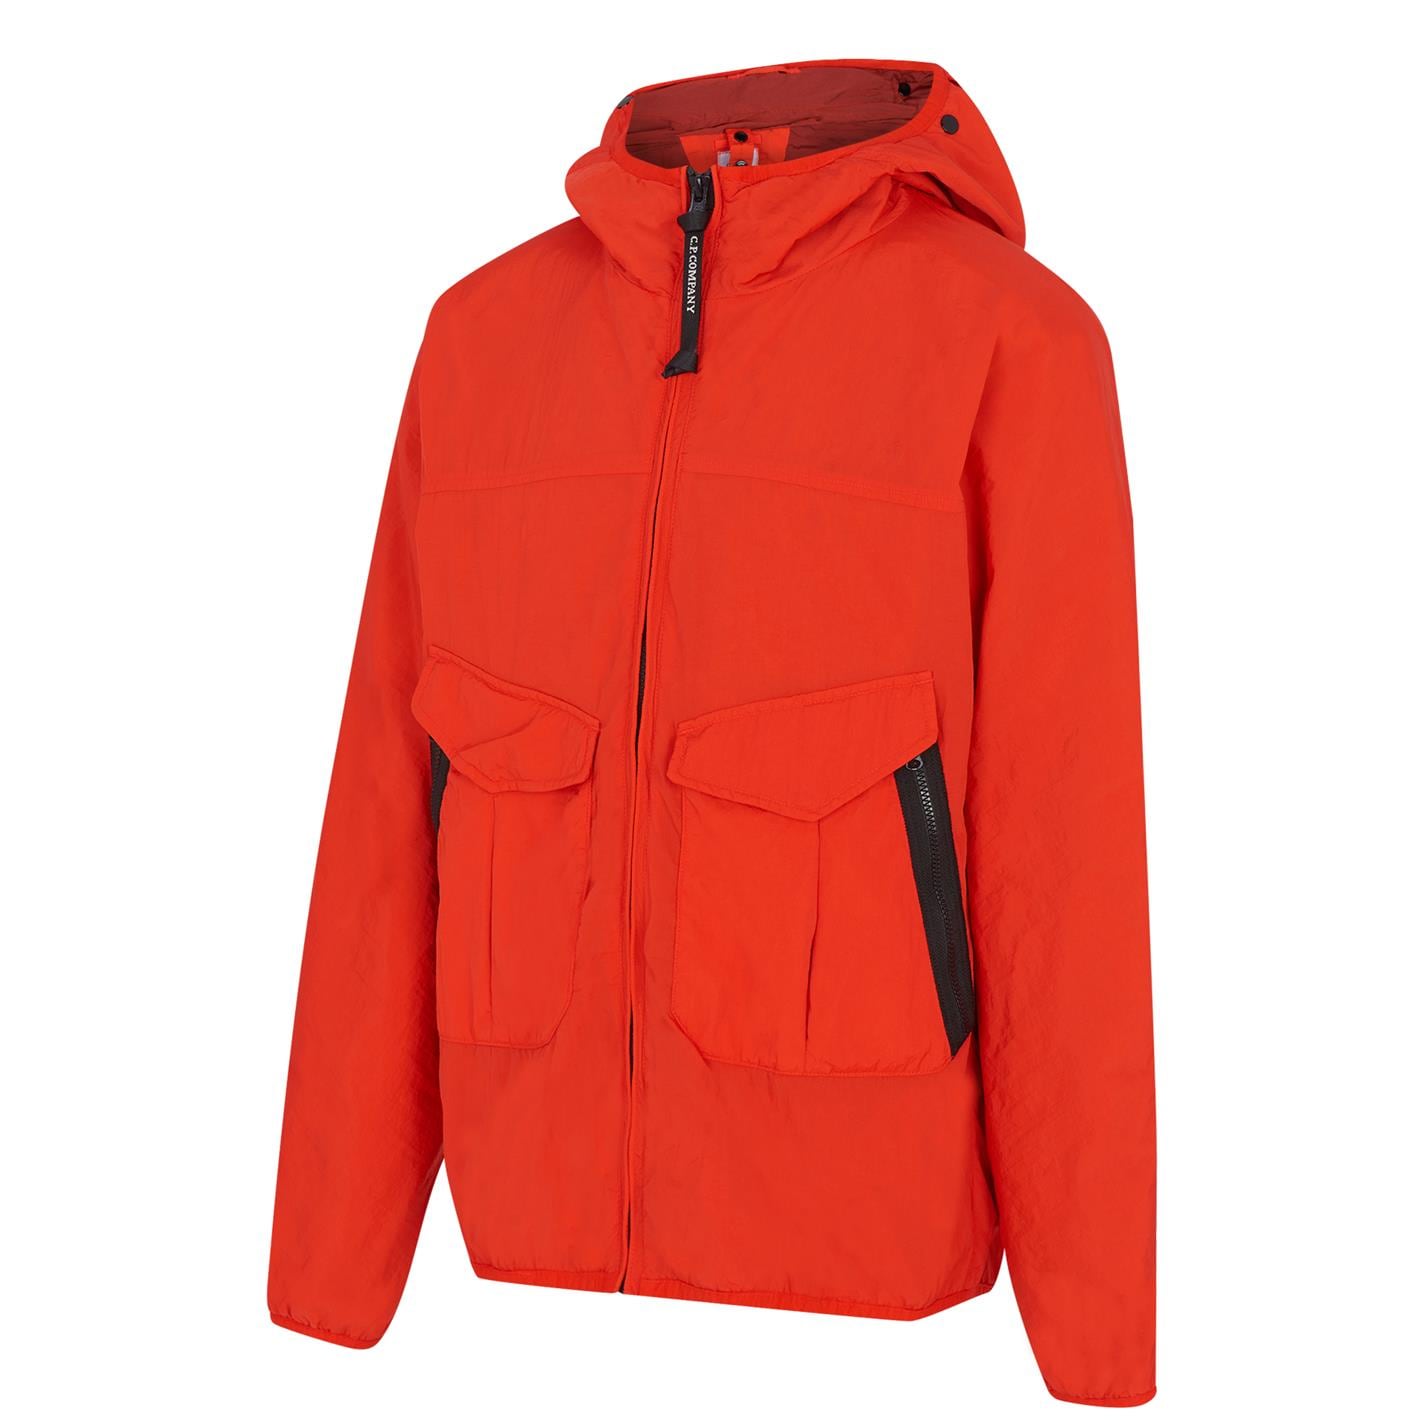 Kids CP Company Garment Dyed CR-L Goggle Jacket - DANYOUNGUK